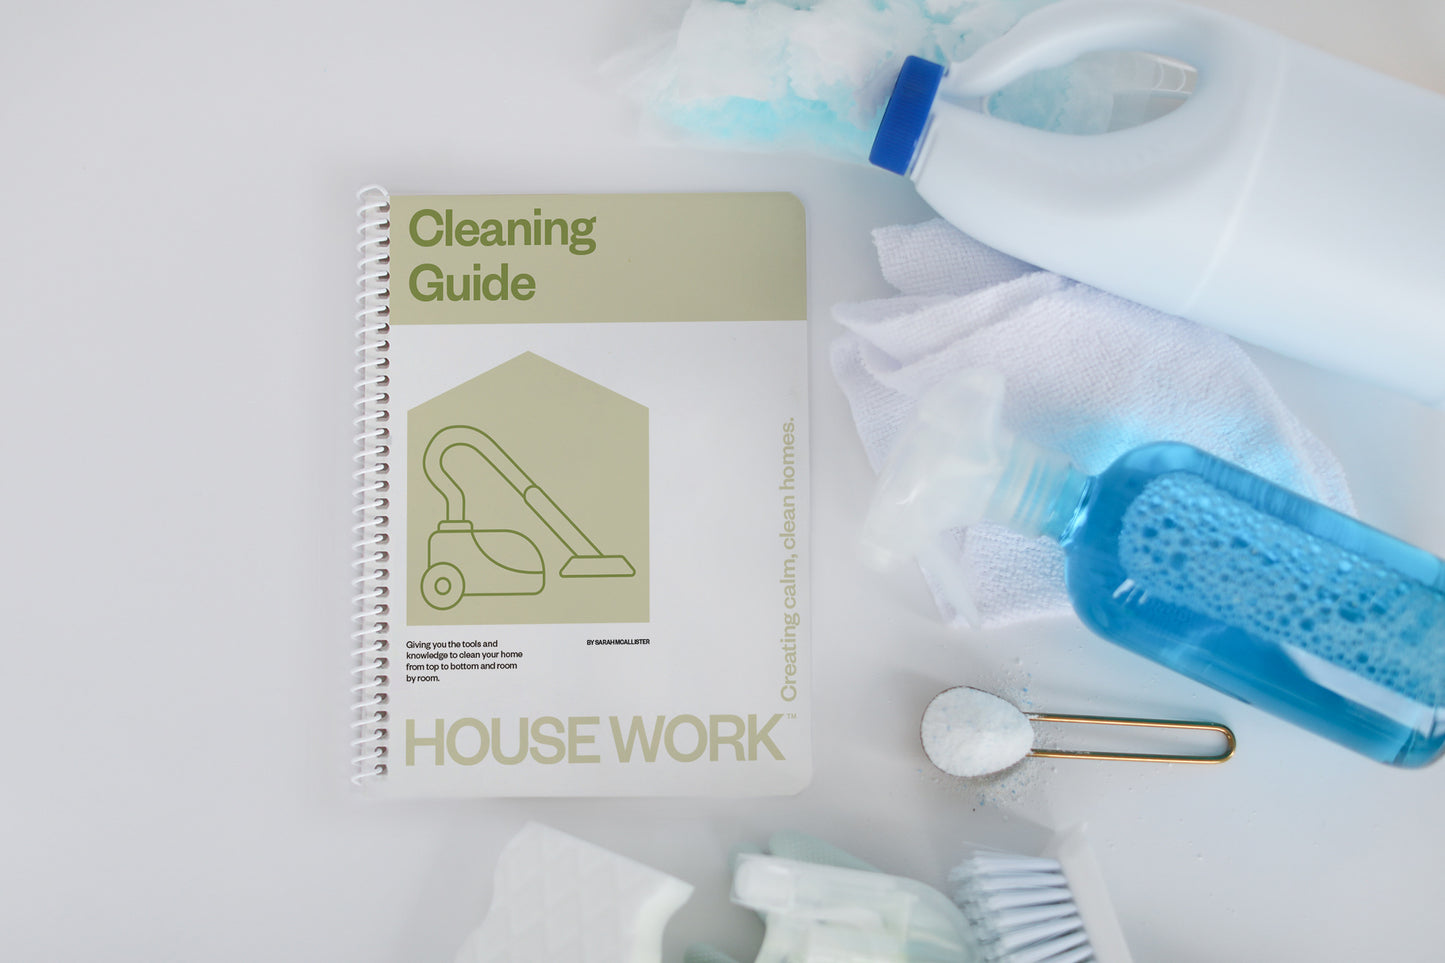 Cleaning + Laundry Guide Bundle (Hard Copy)